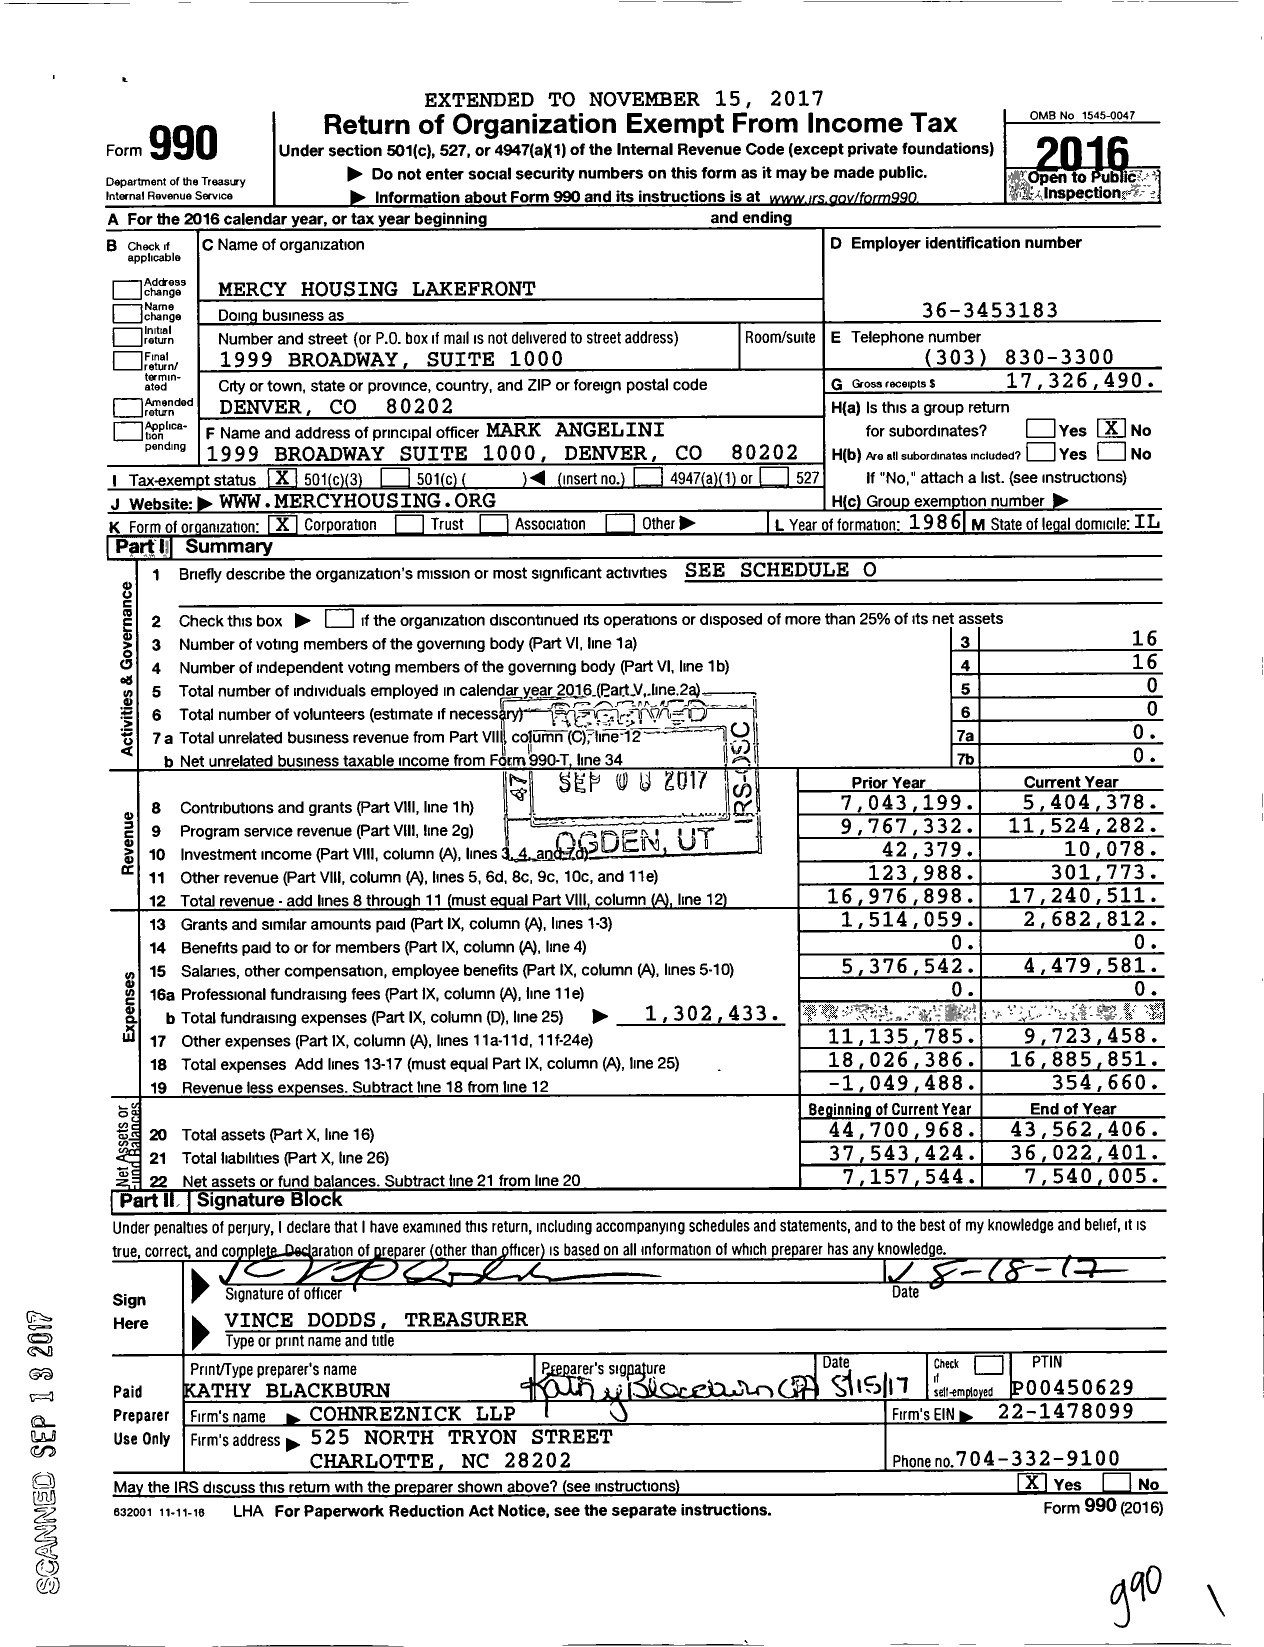 Image of first page of 2016 Form 990 for Mercy Housing Lakefront (MHL)